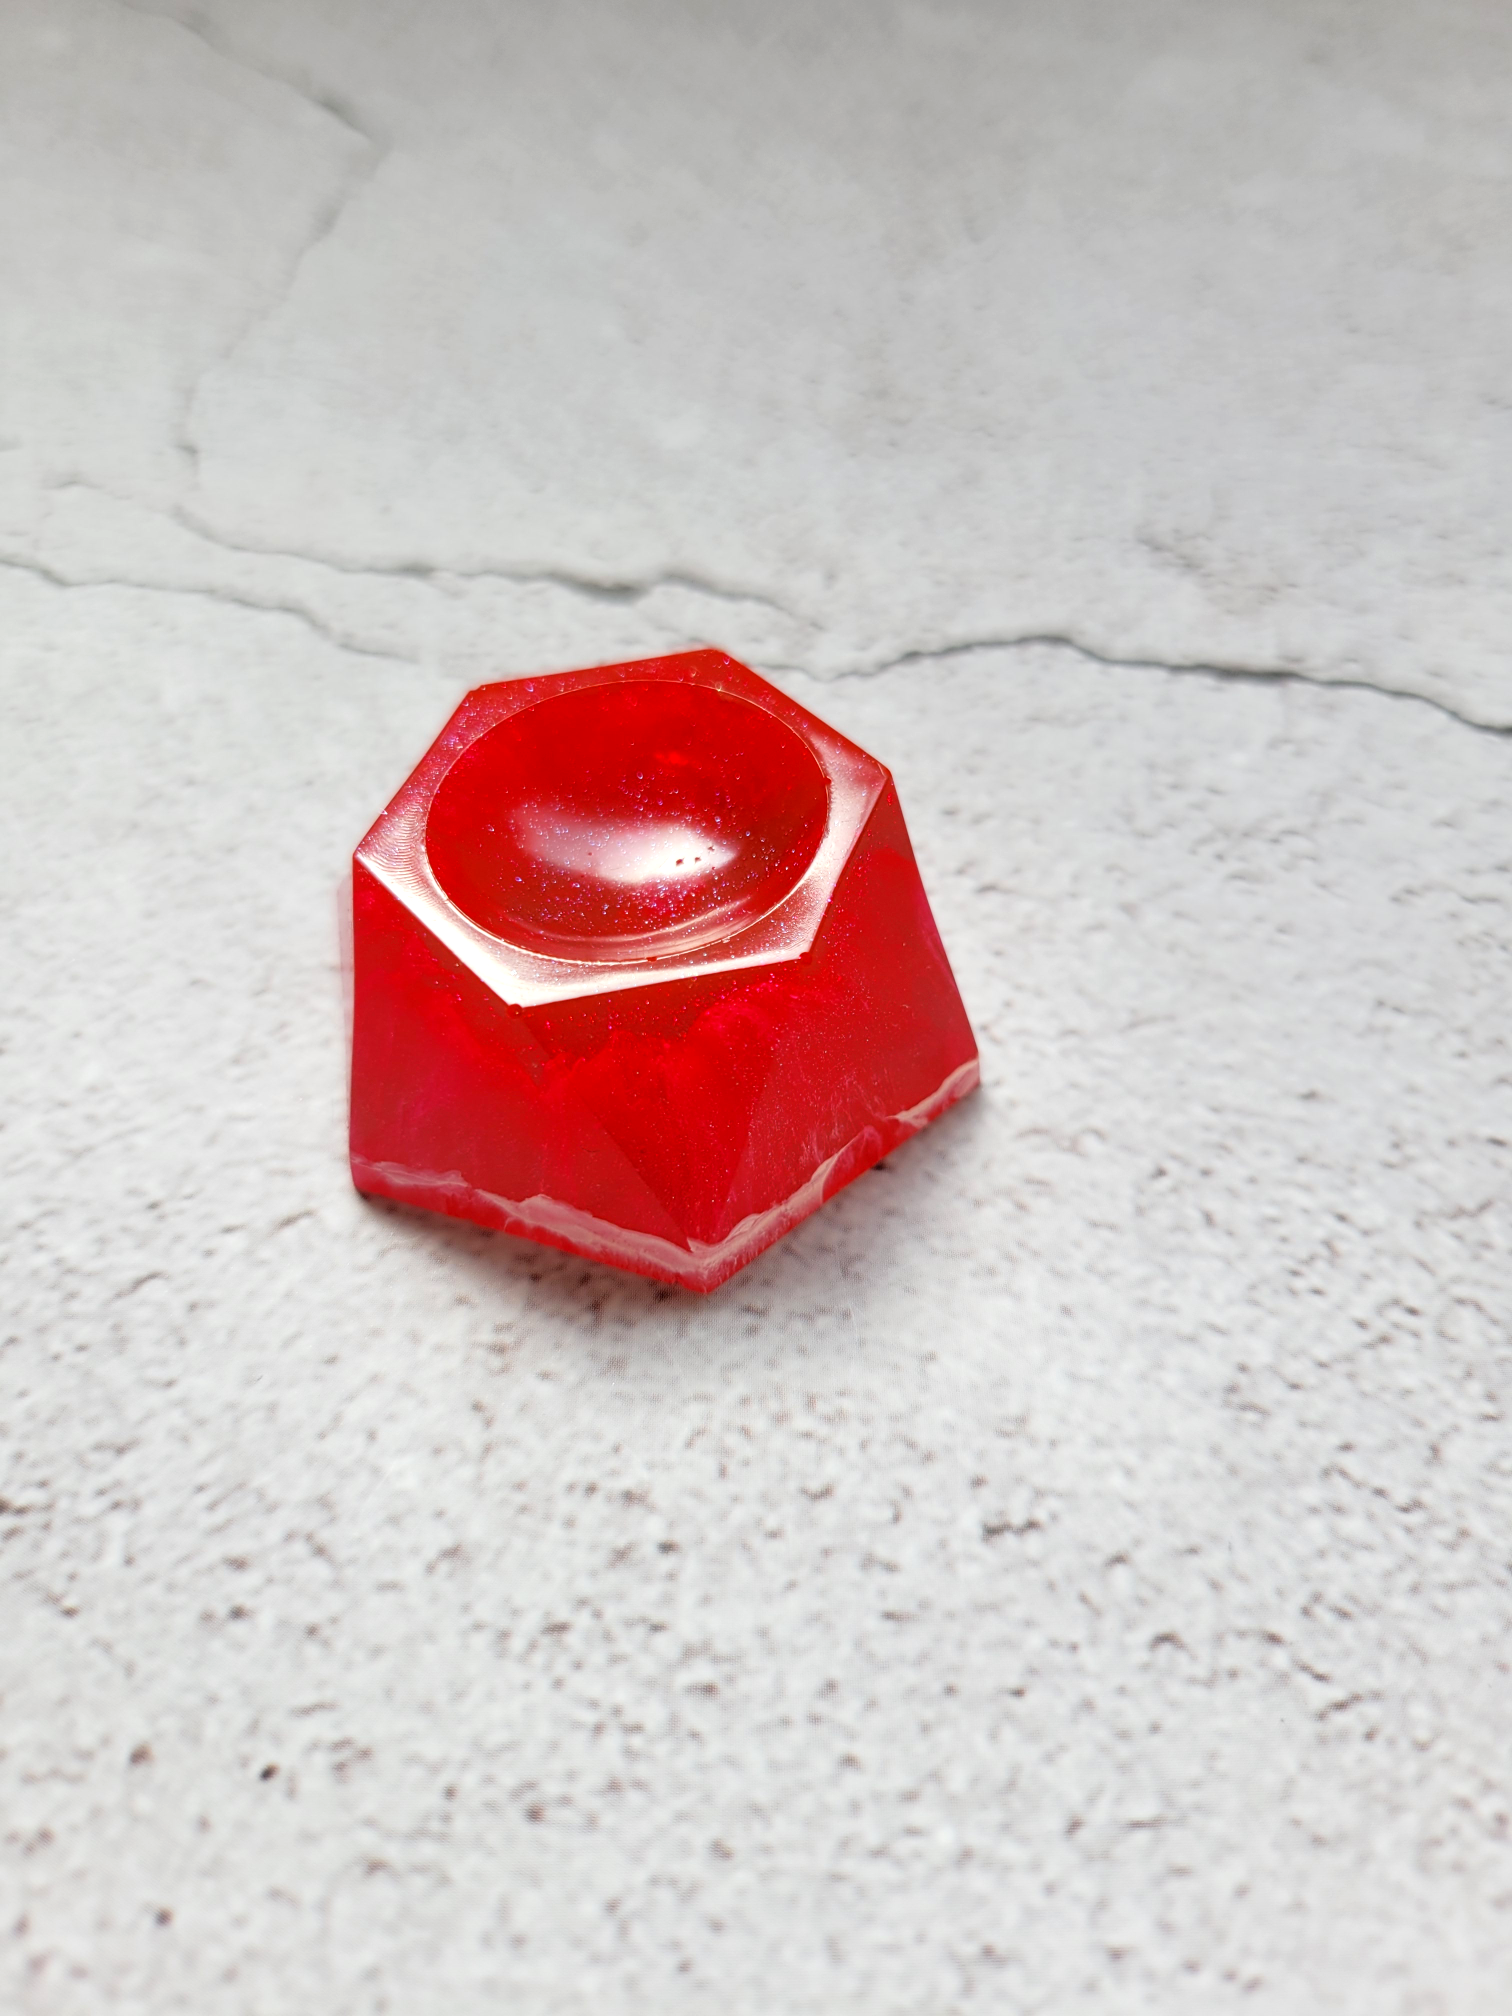 A hexagonal stand for dice or a Tabletop Familiar. It's red with white plumes of ink inside. This is a side view.